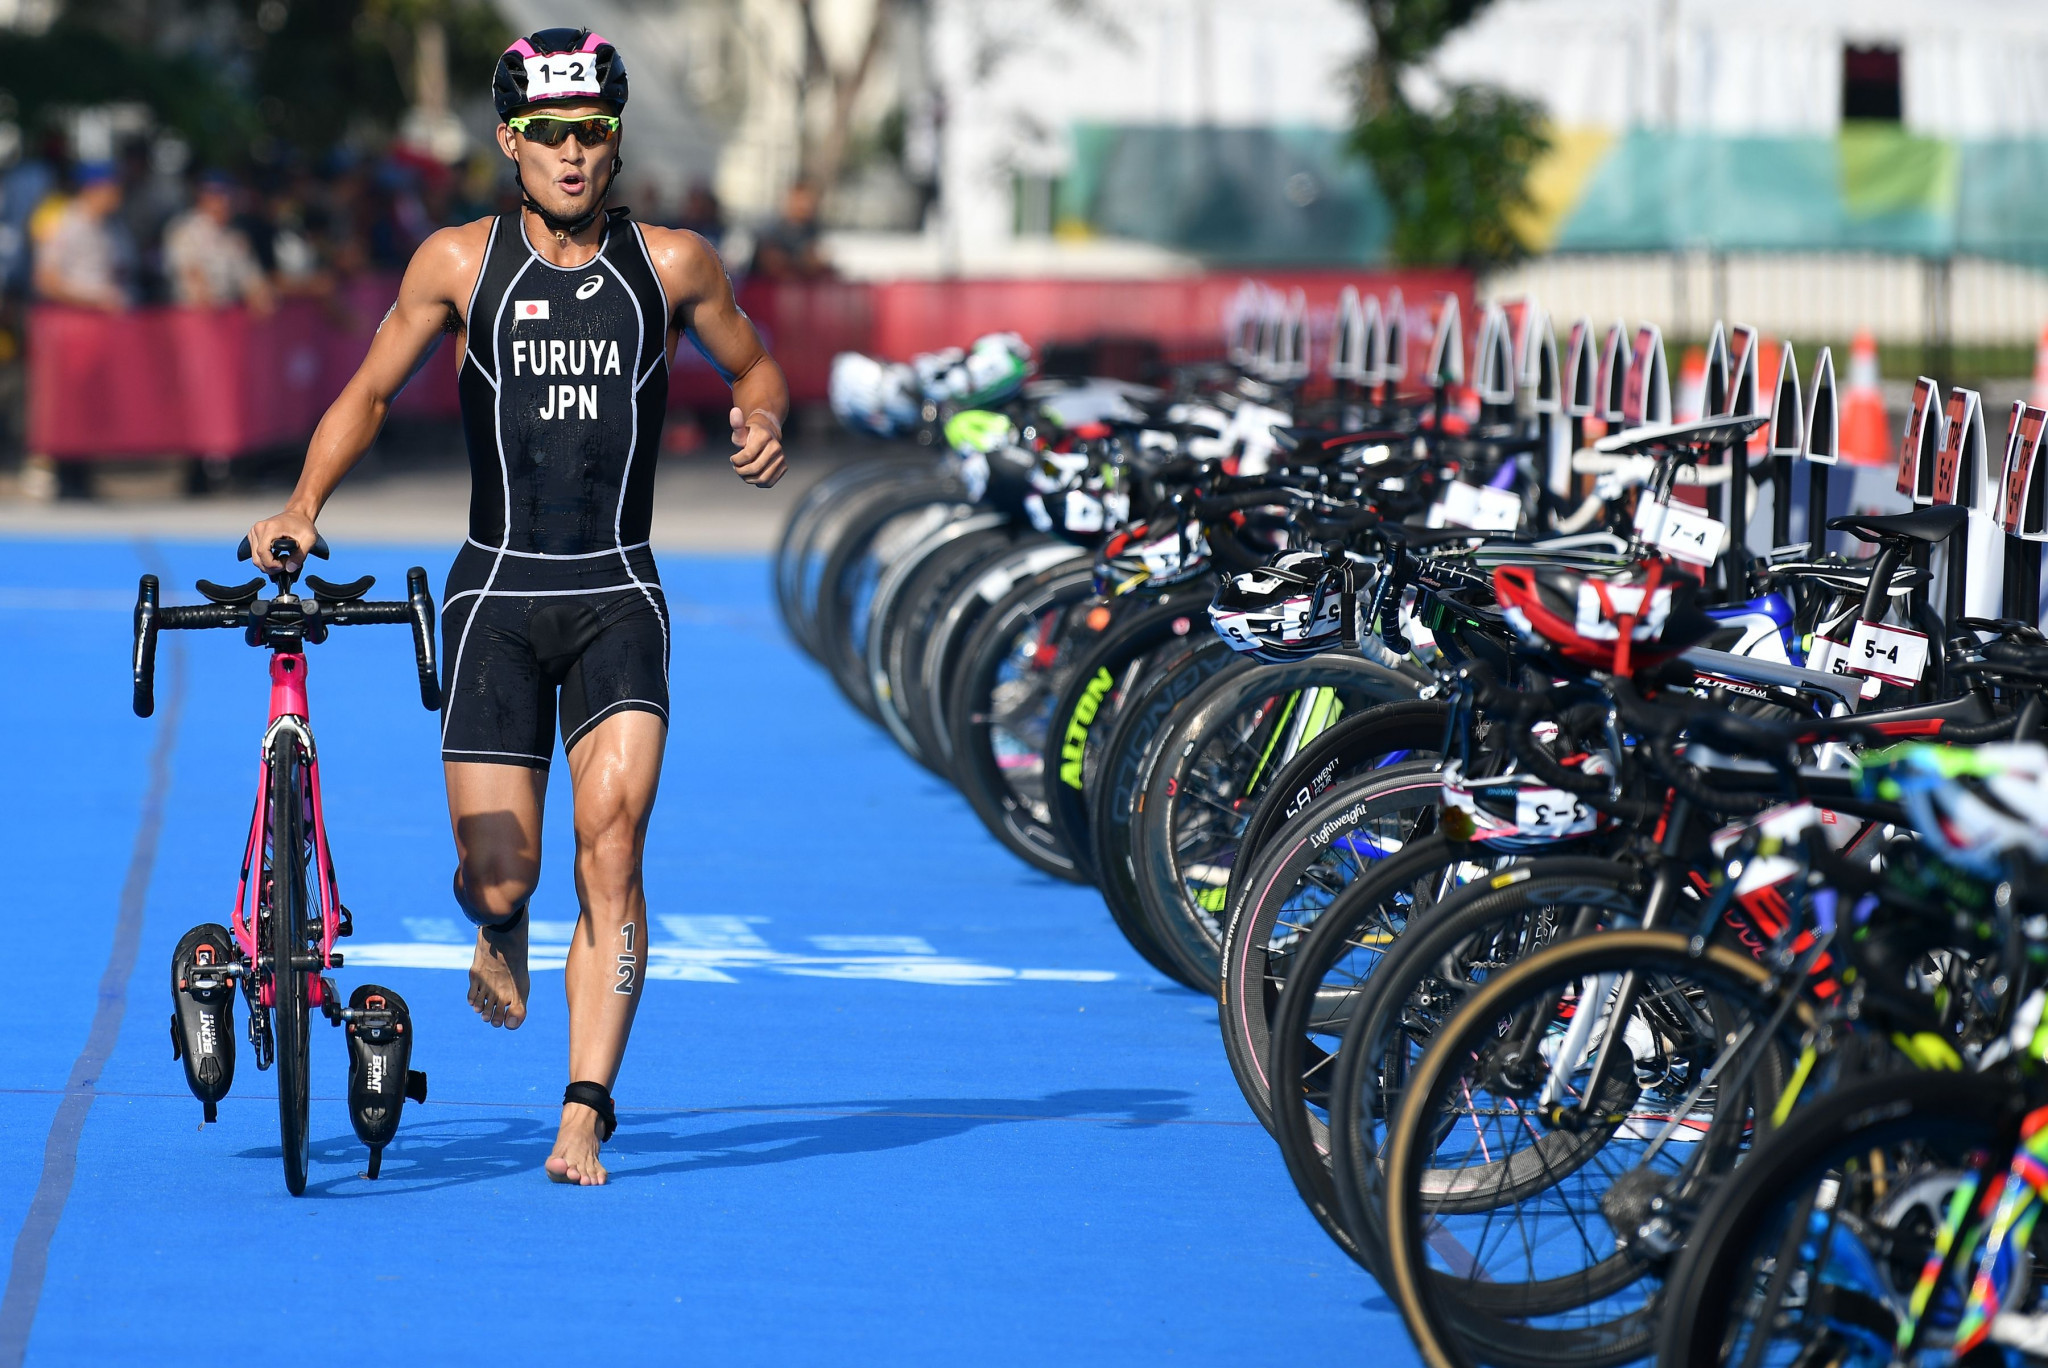 Hangzhou 2022 triathlon races are due to take place in Chun'an  ©Getty Images